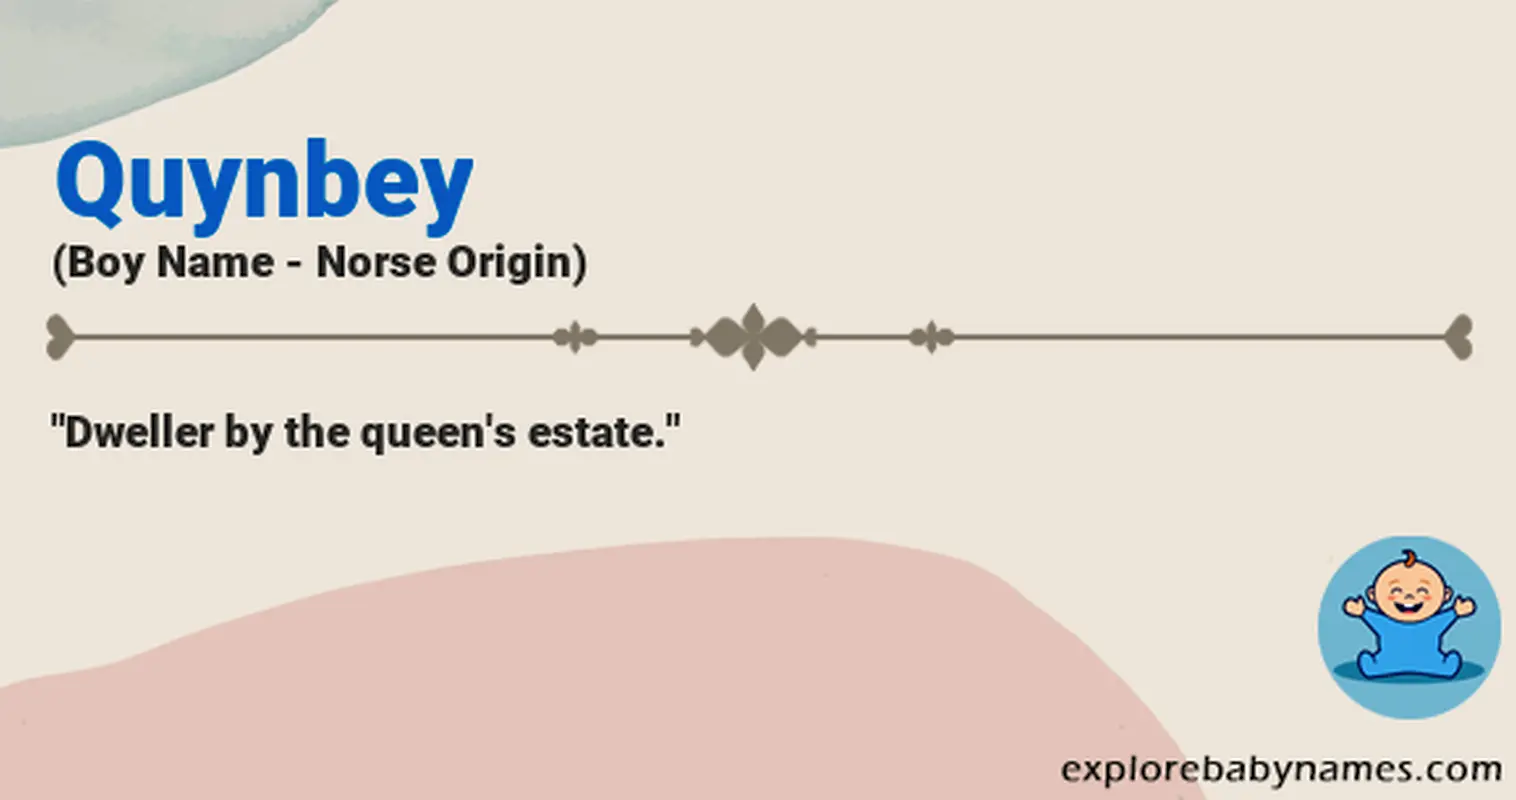 Meaning of Quynbey